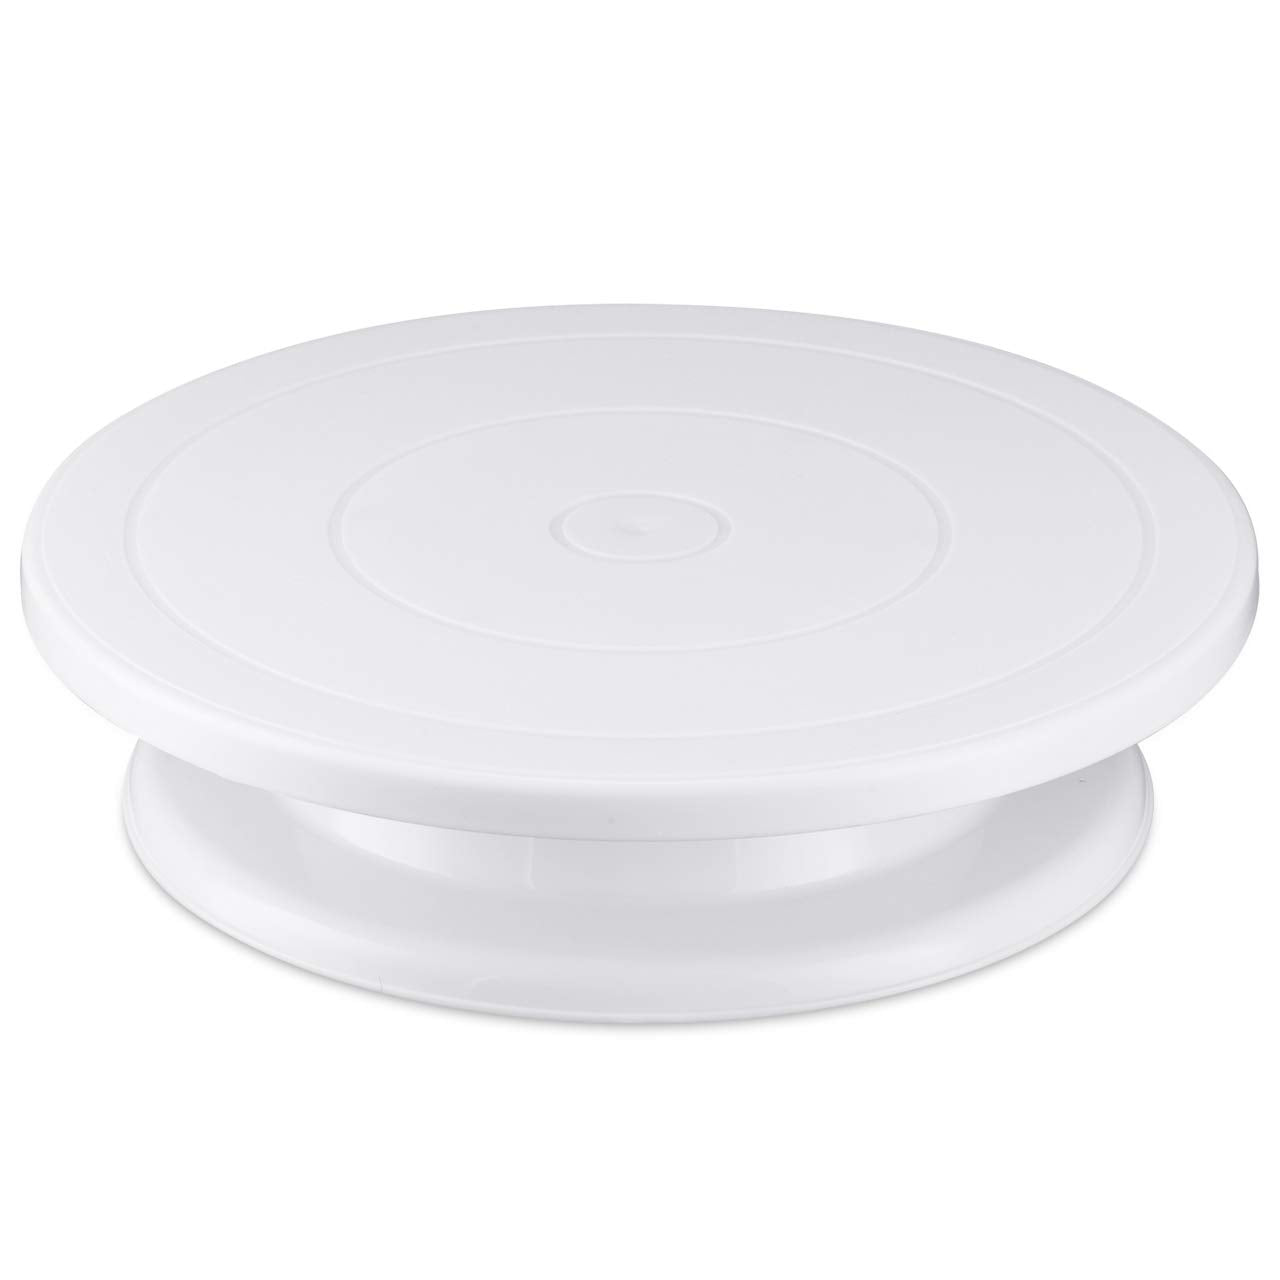 11 Inch Rotating Cake Turntable Cake Stand Spinner for Cake Decorations  Pastries